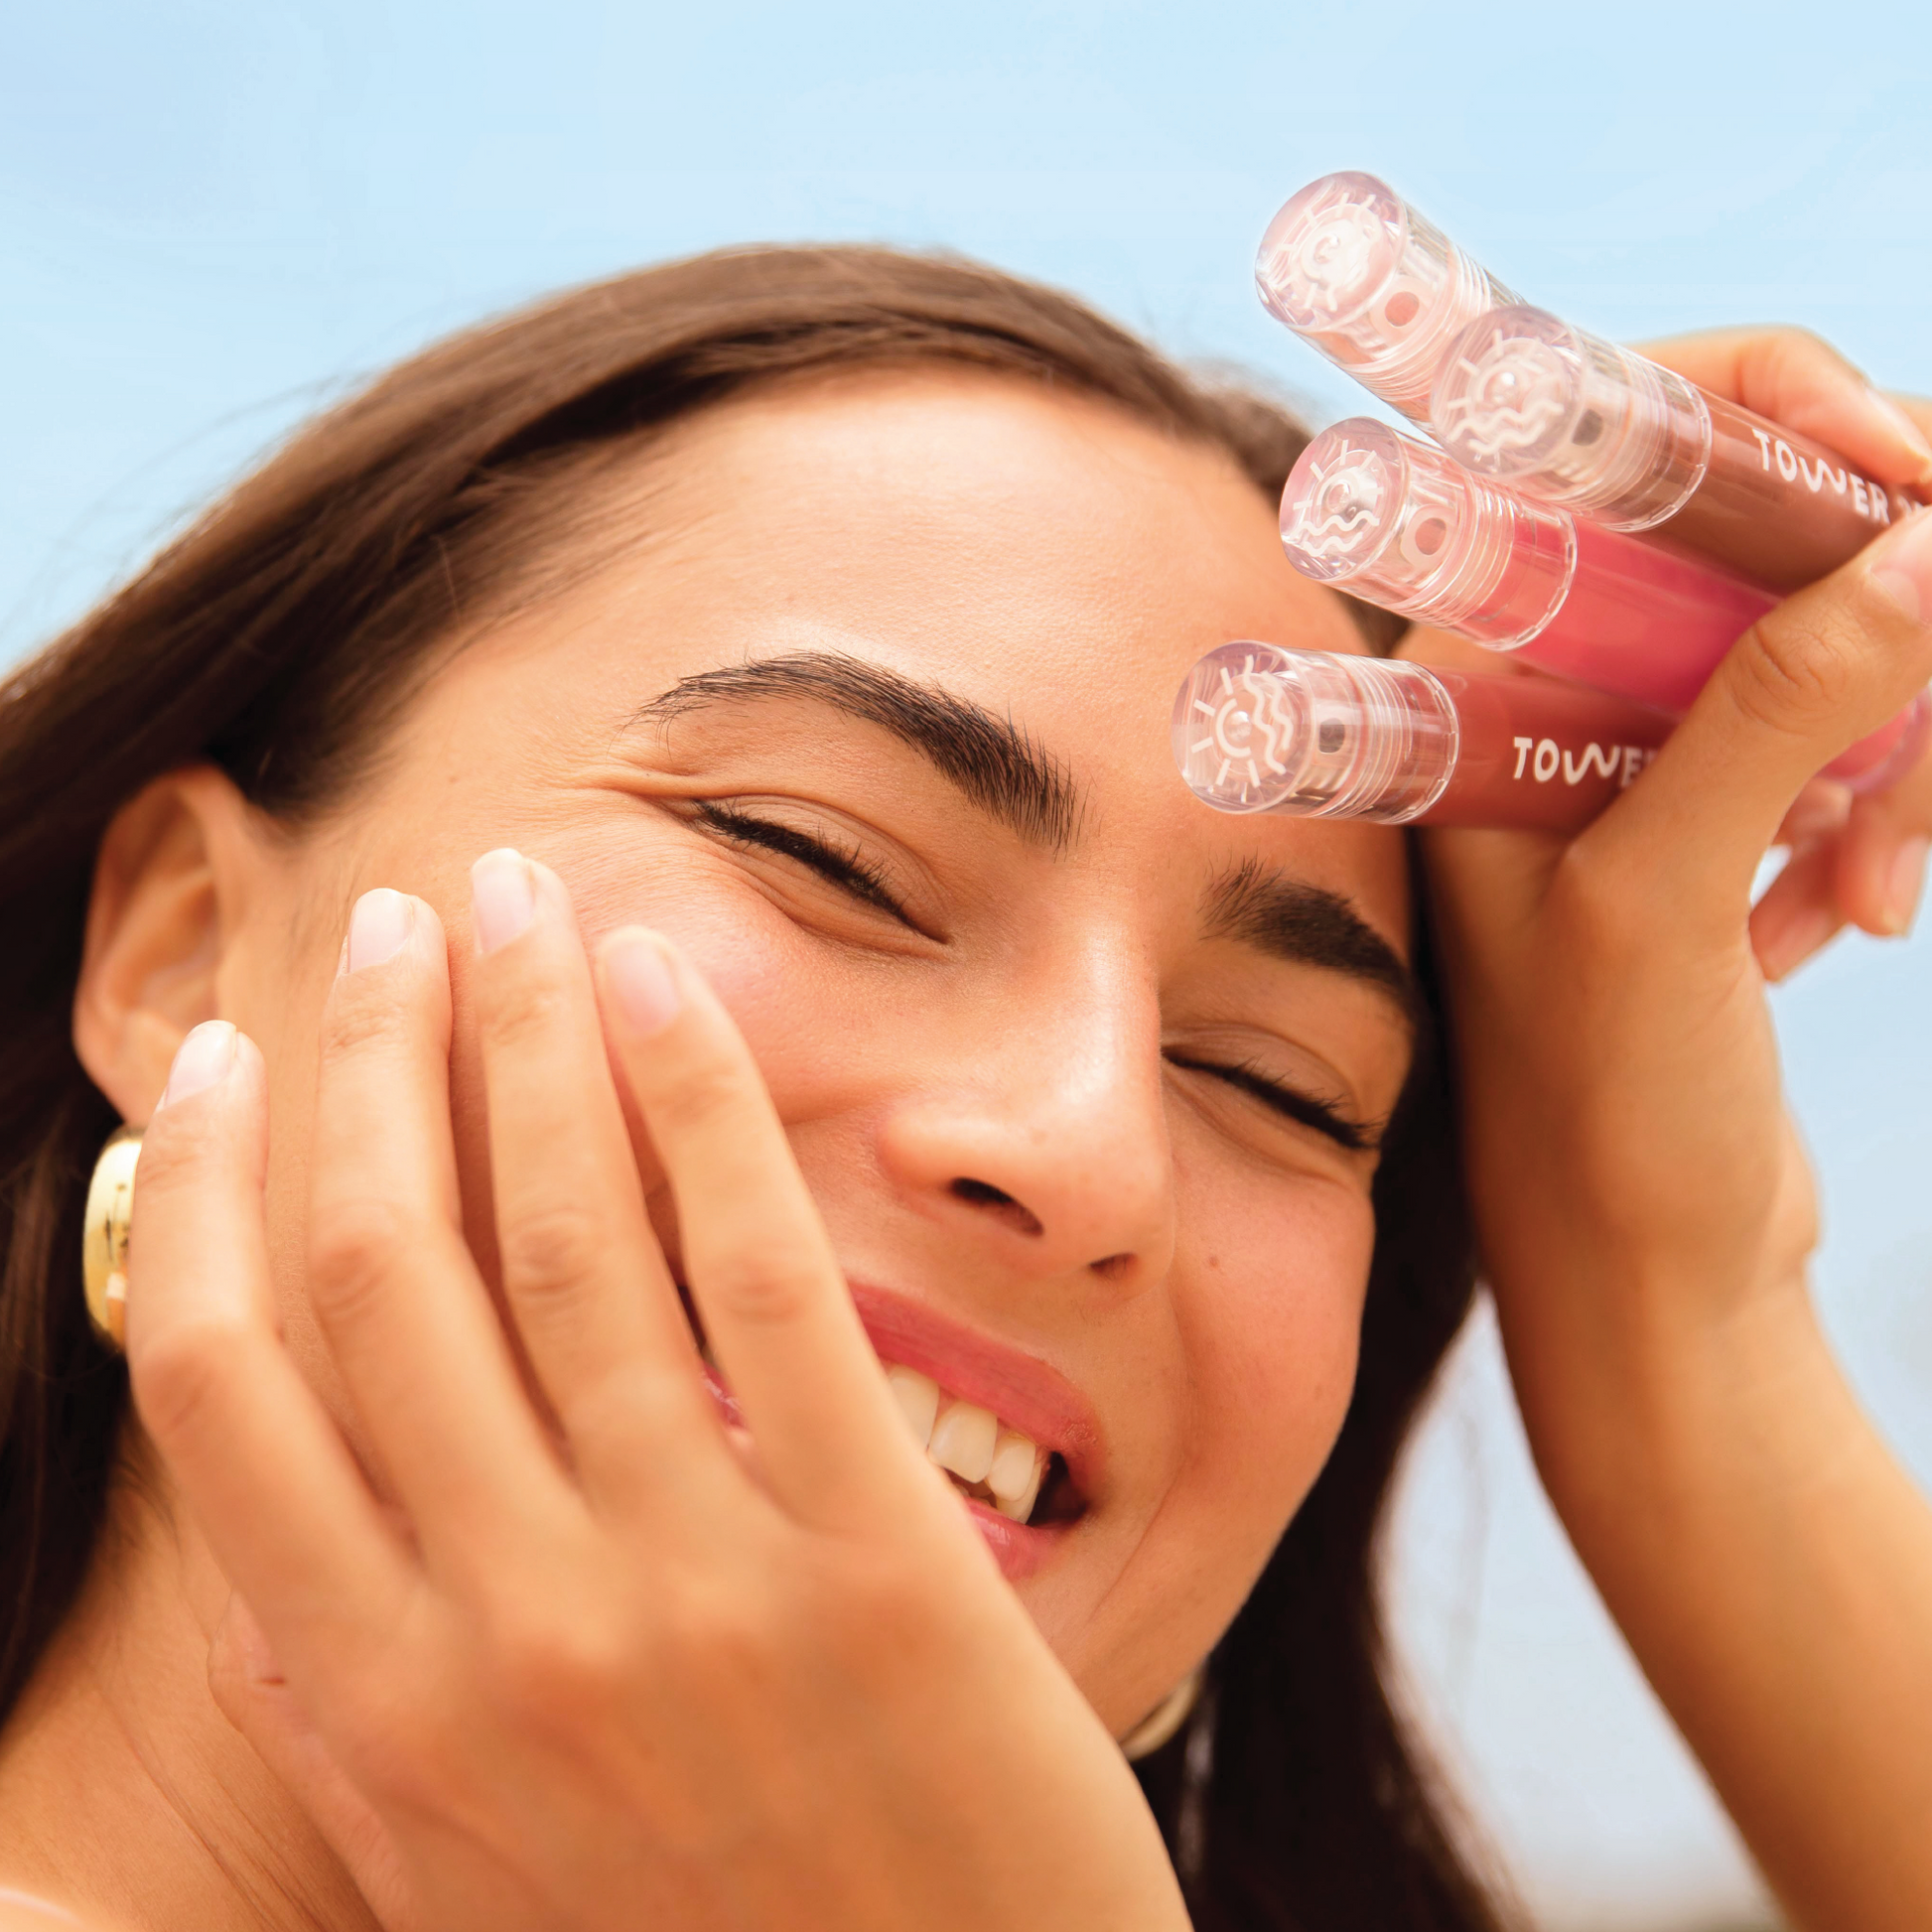 Shared: Closeup photo of a girl with brown hair smiling, holding up 4 ShineOn Milky Lip Jellies (assorted shades) to her face